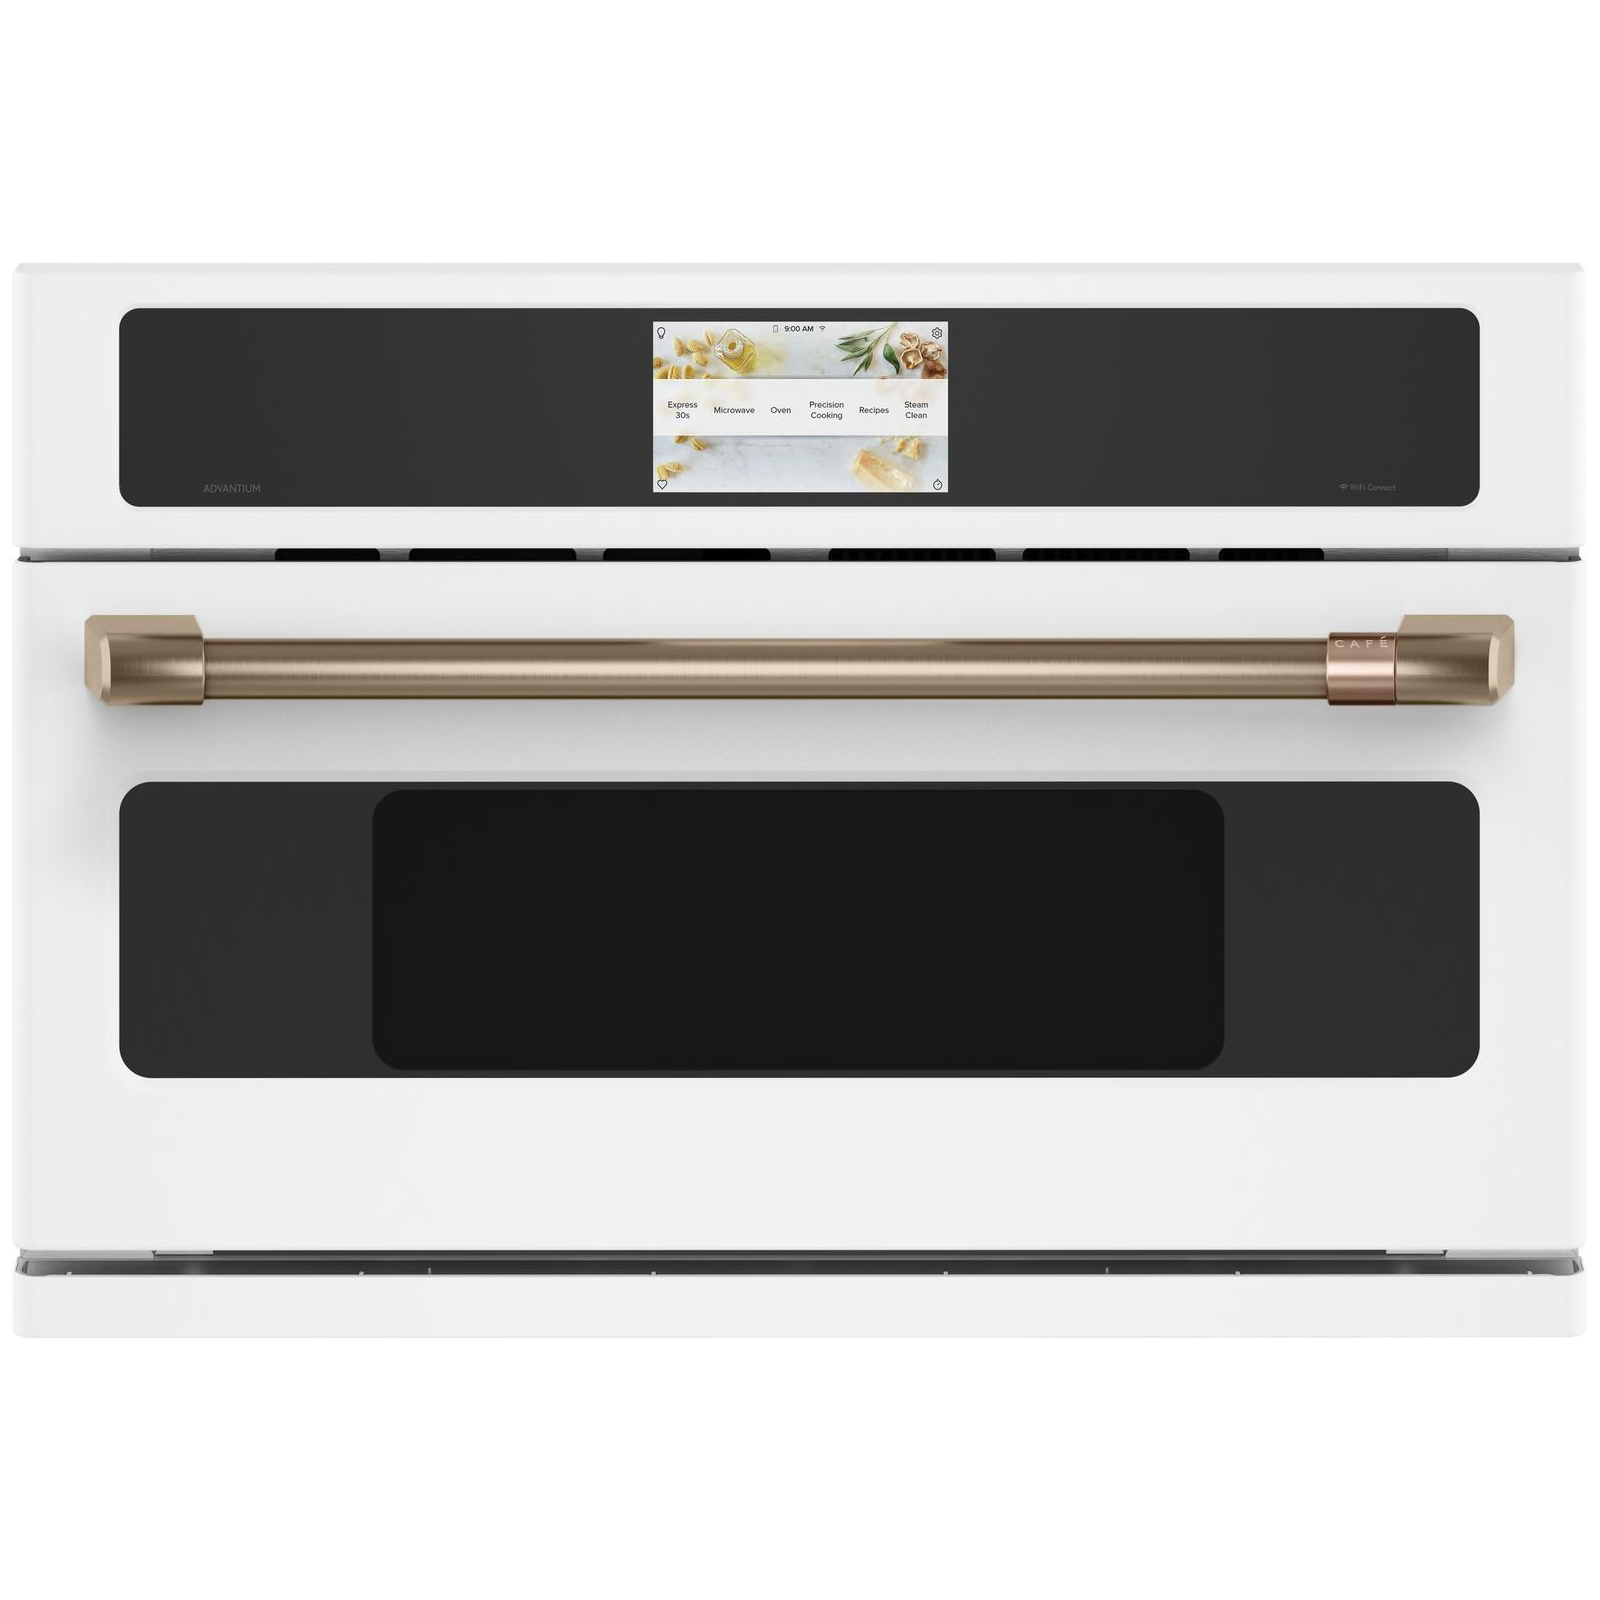 CAFE CSB913P4NW2 30" Smart 5-in-1 Oven with 120V Advantium Technology